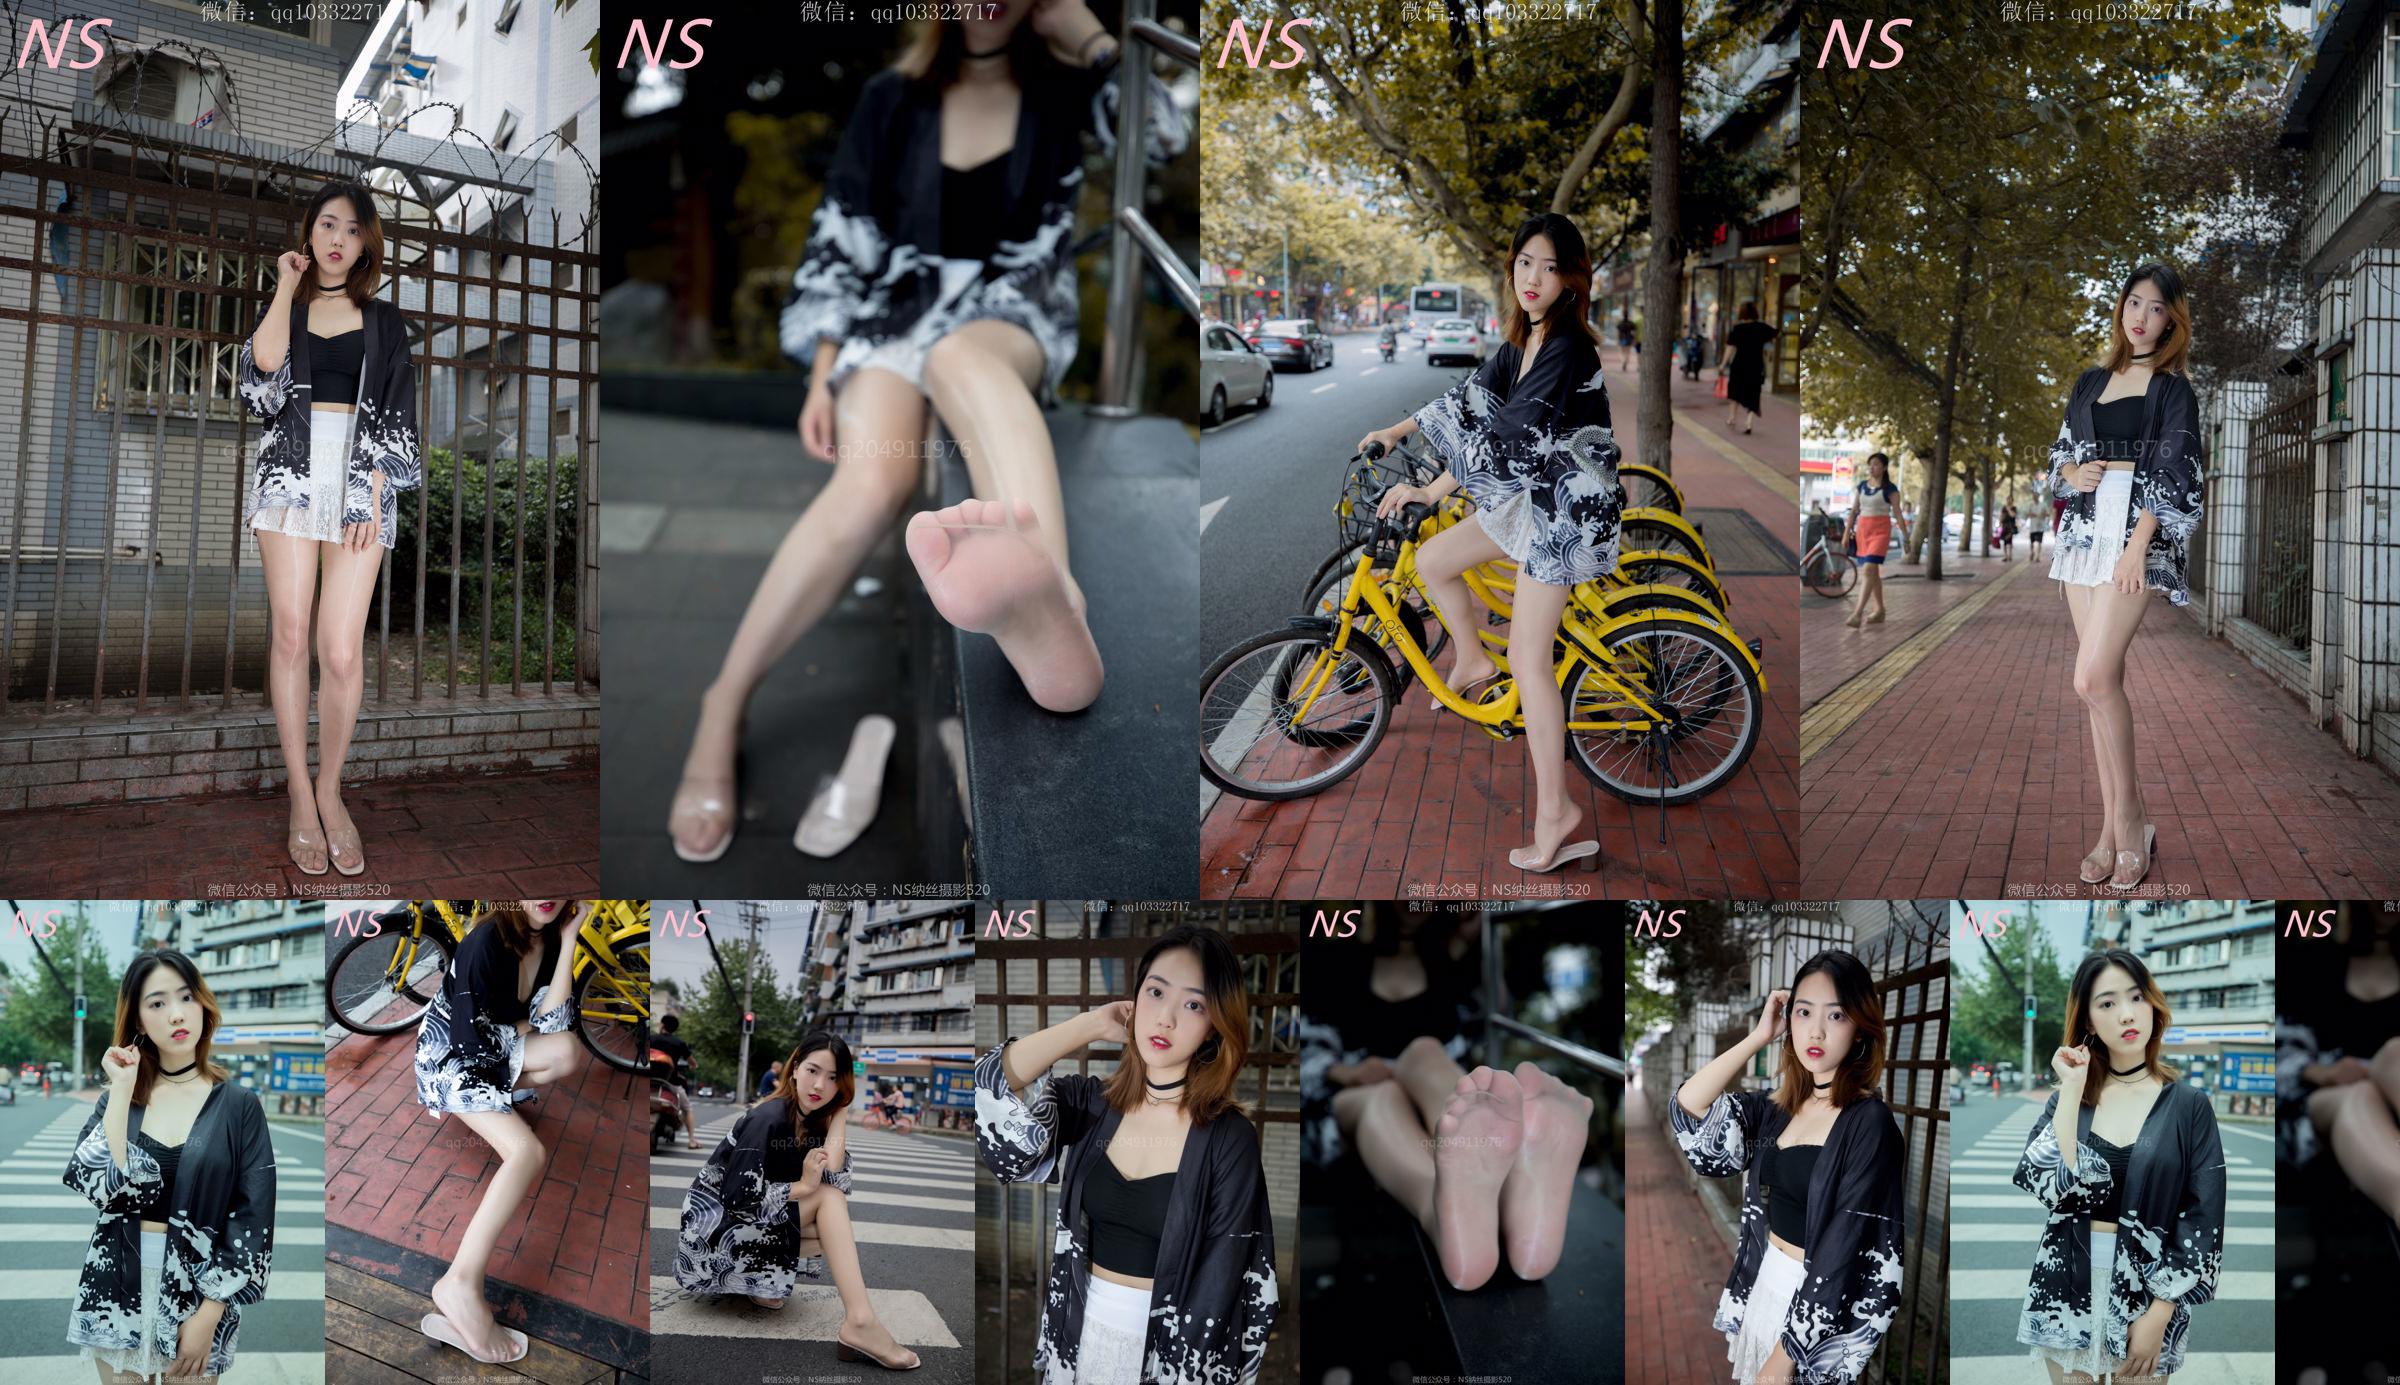 Man Wen "A Trip to a Tricycle in Flesh-colored Stockings and Beautiful Legs" [Nass Photography] No.e8a615 Page 5